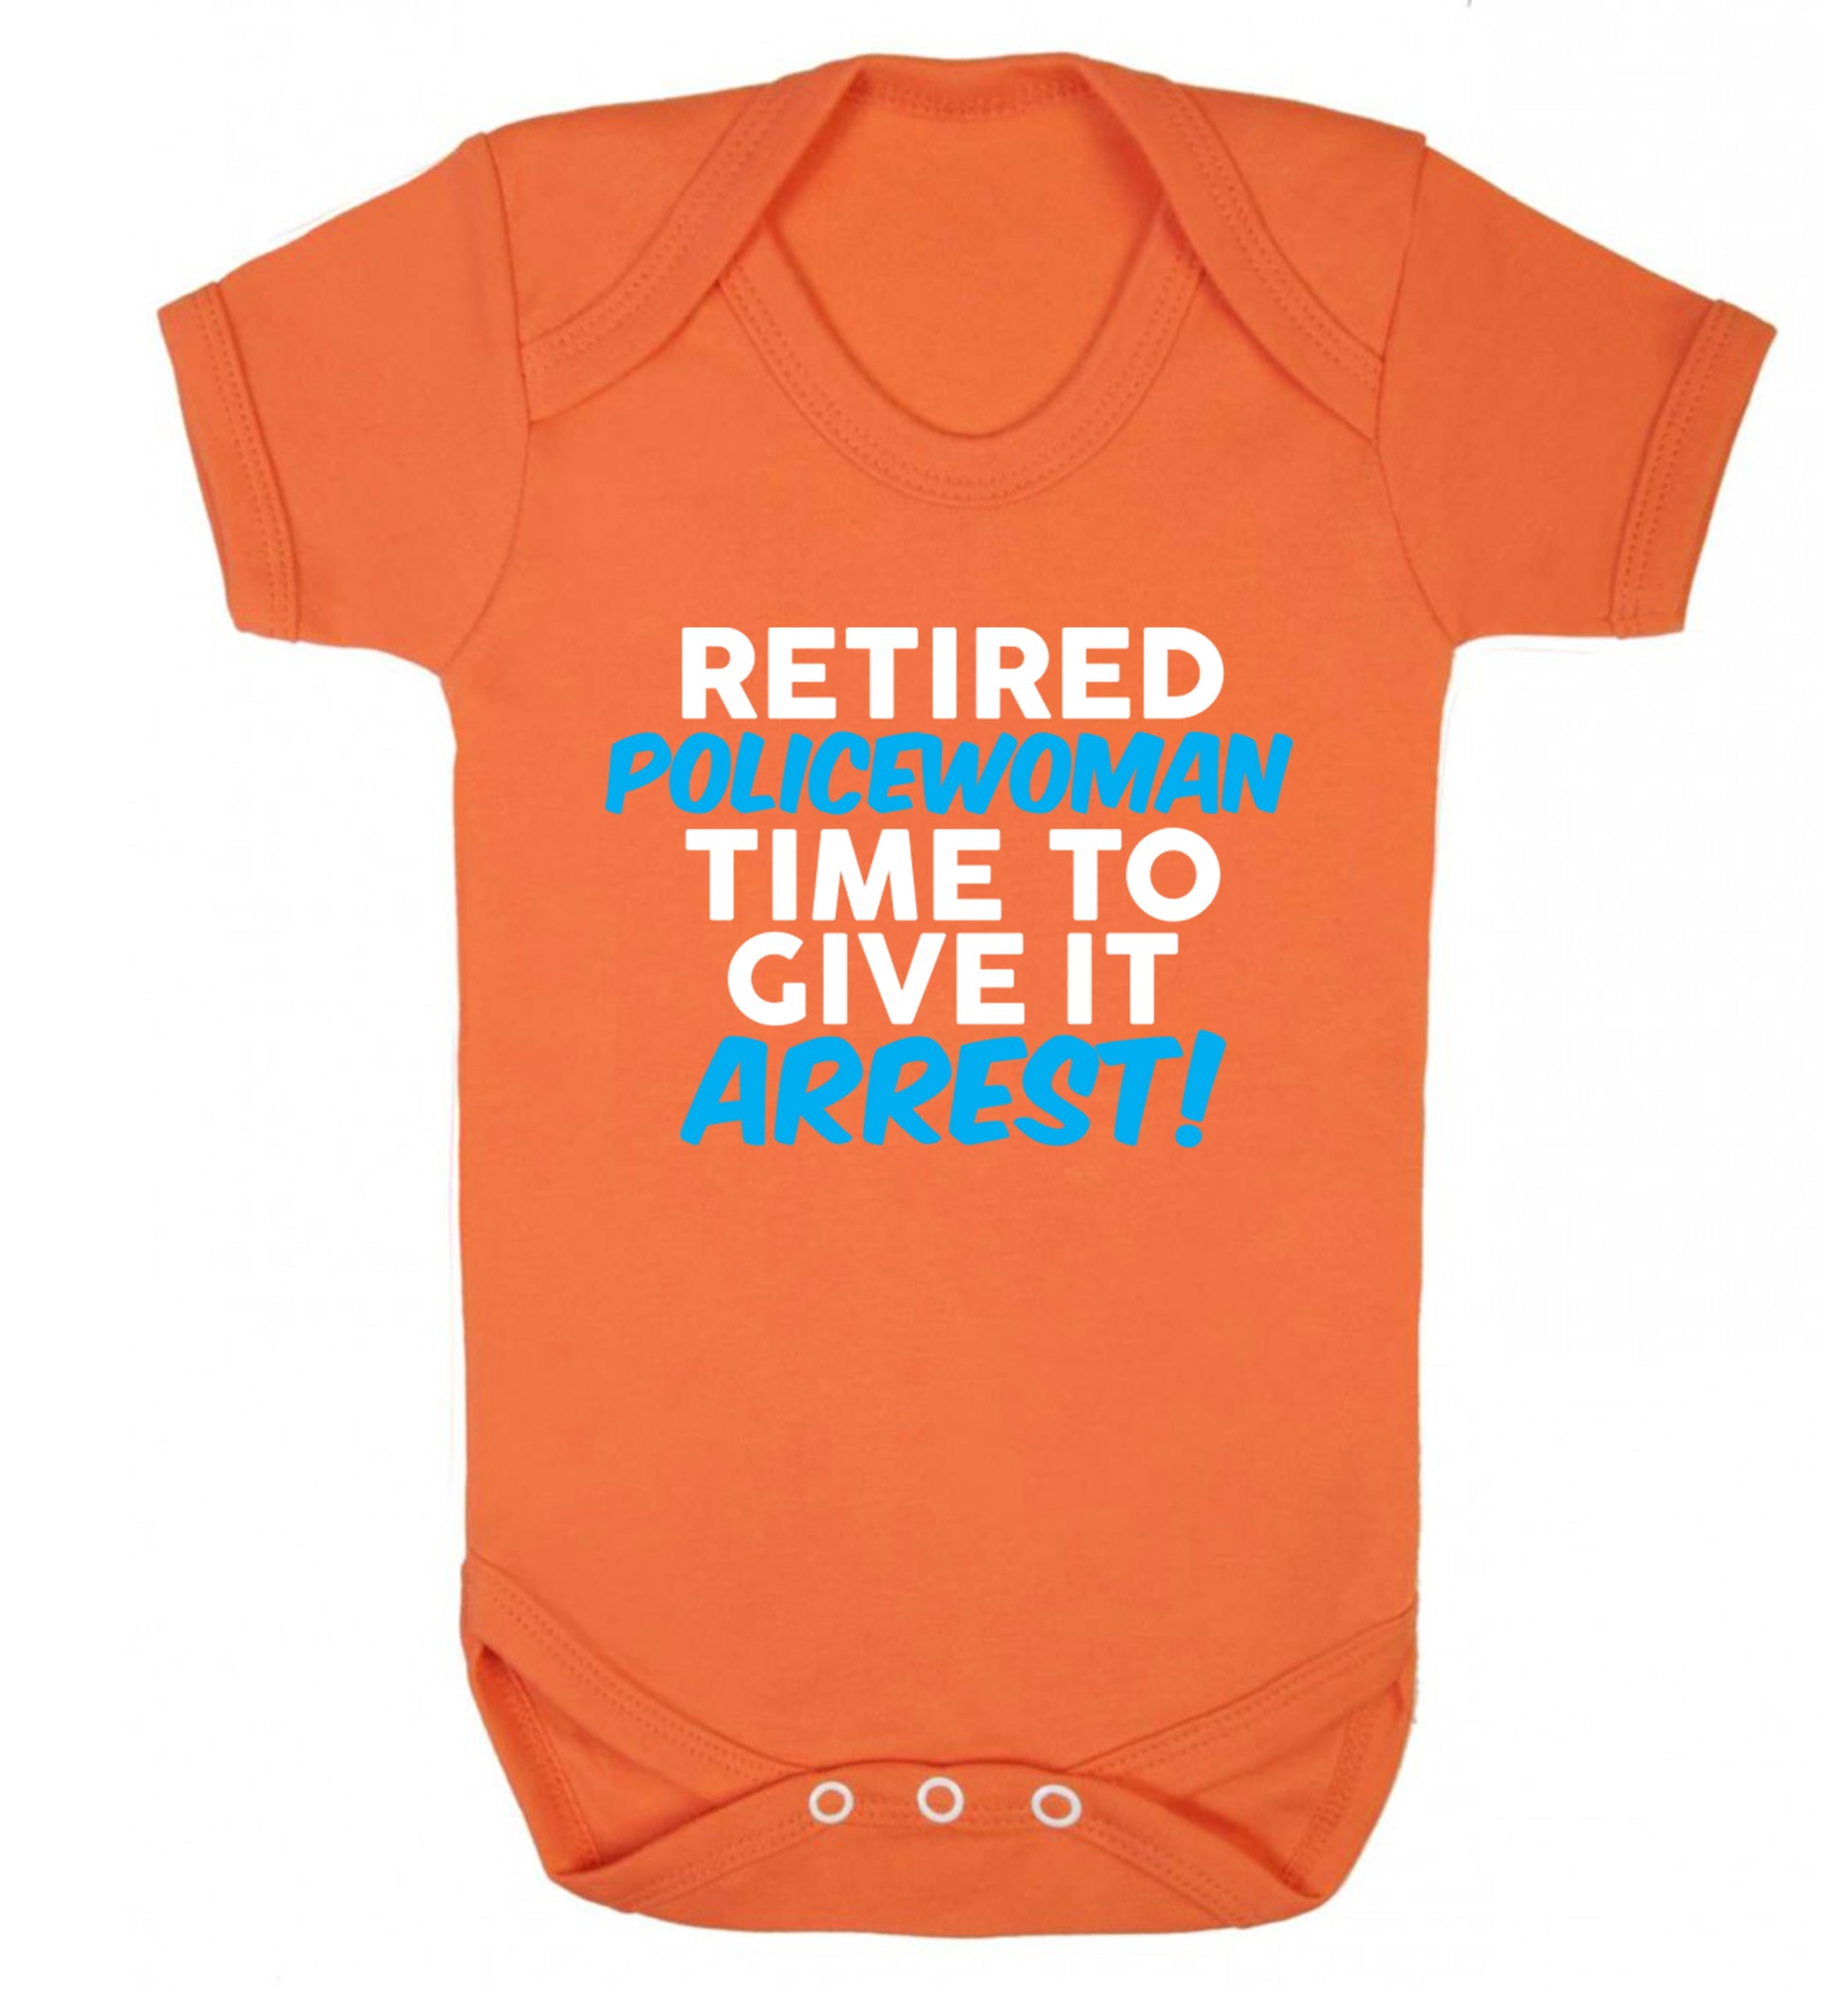 Retired policewoman time to give it arrest Baby Vest orange 18-24 months